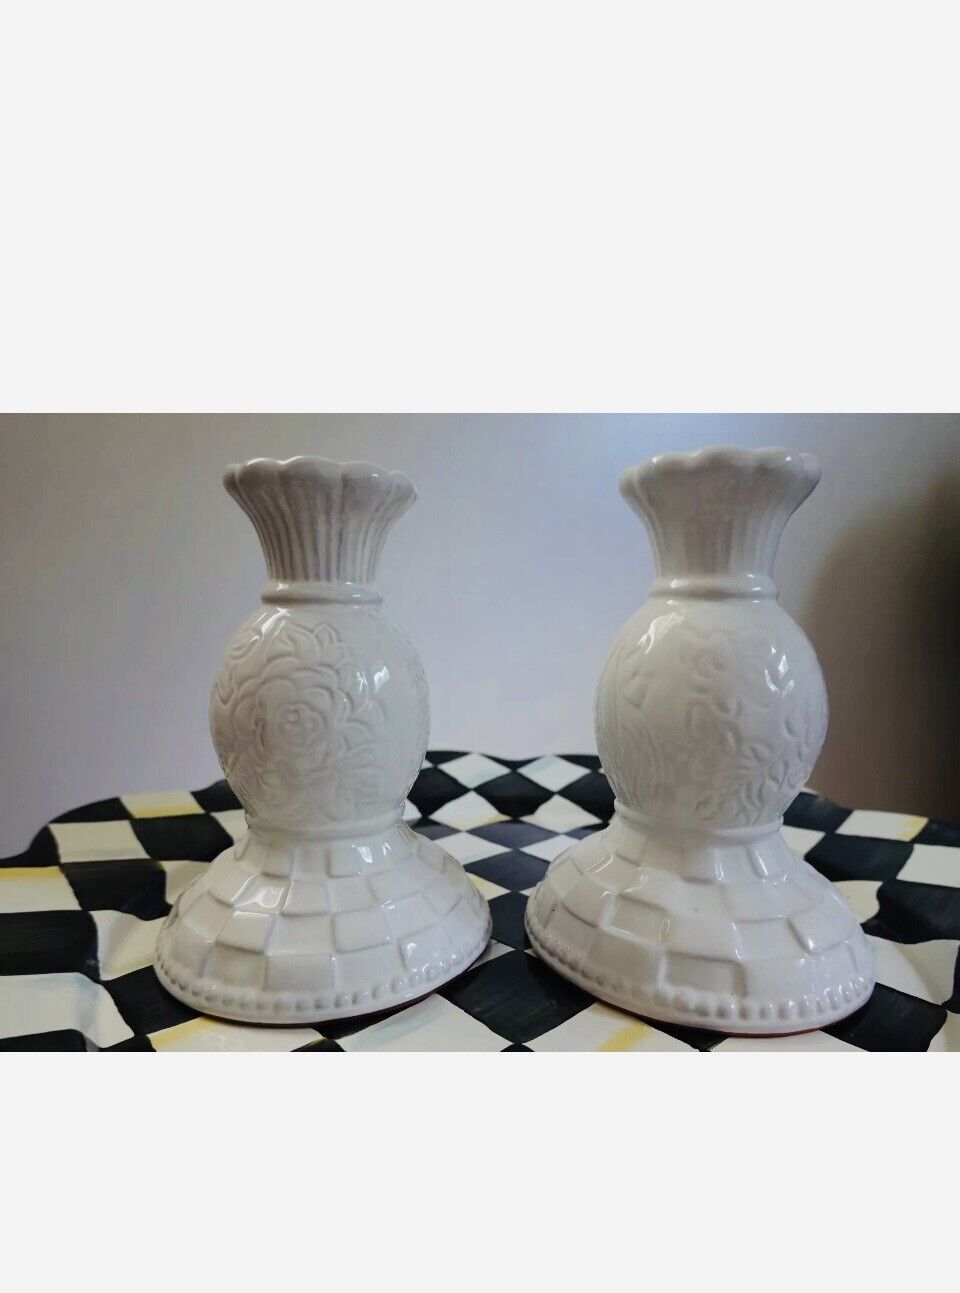 MACKENZIE-CHILDS SWEETBRIAR SET OF 2 CANDLE HOLDERS